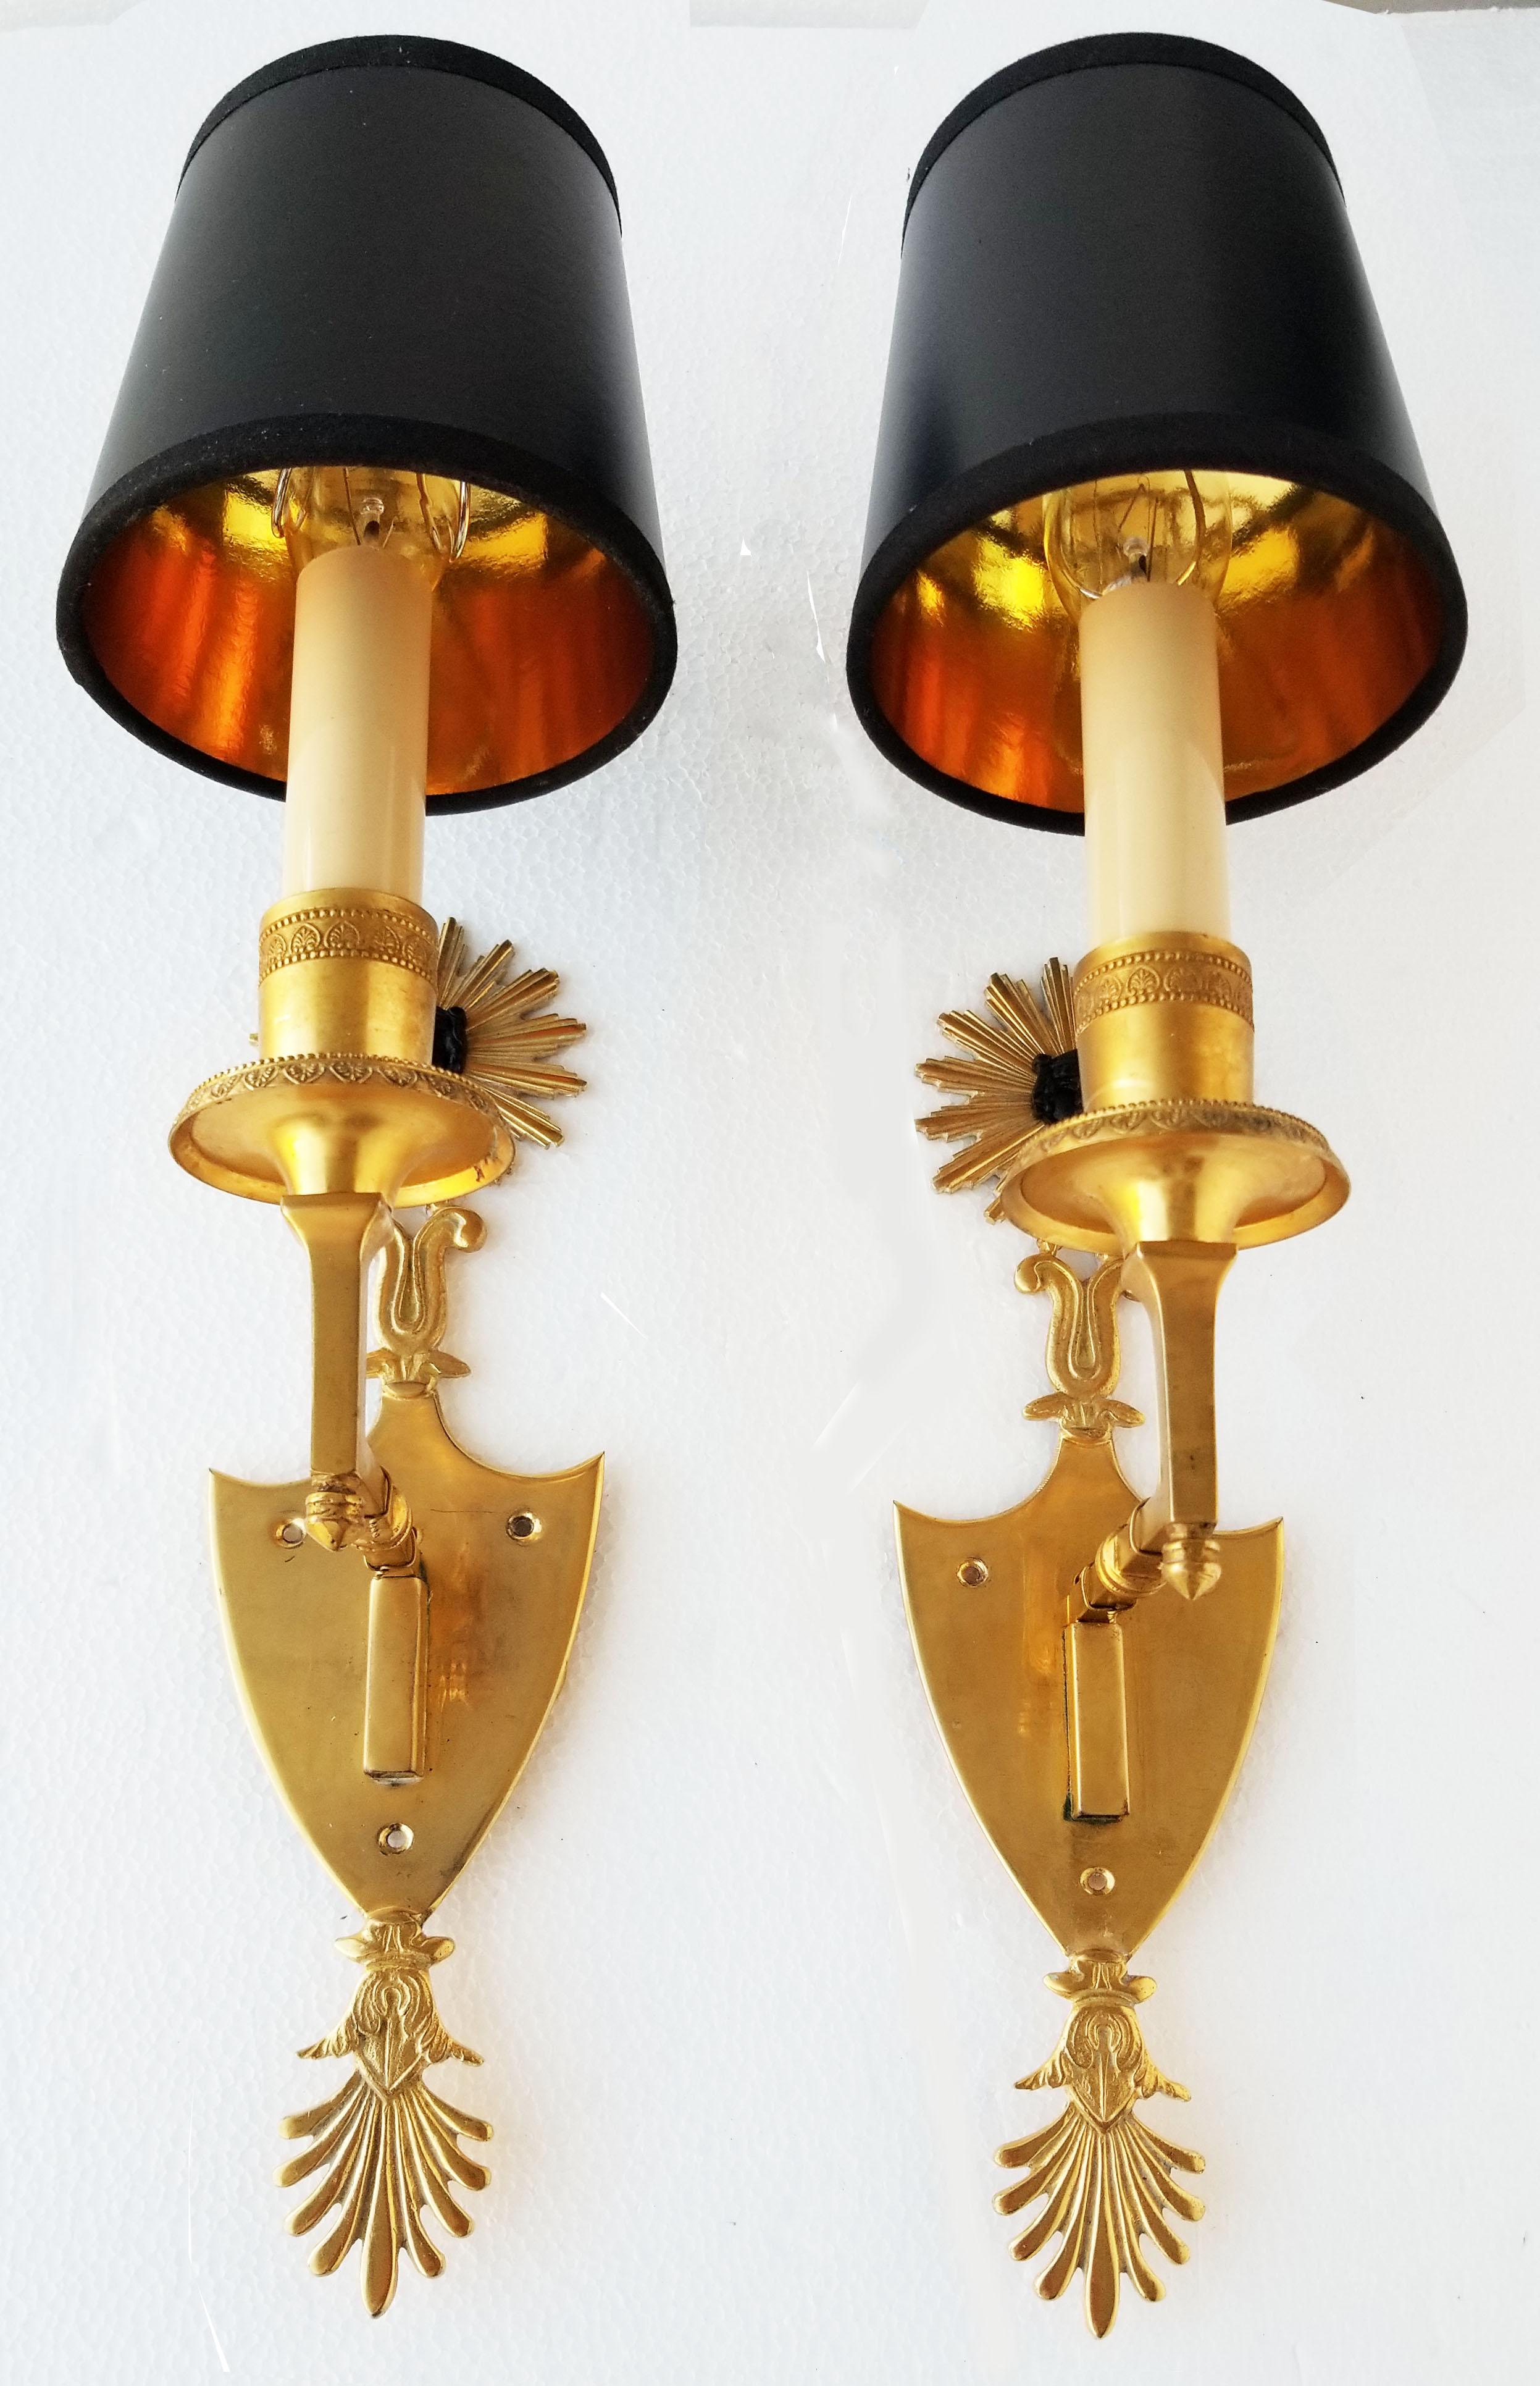 Superb pair of Andre Arbus style sconces in doré bronze.
1 light, 40, watts max bulb.
US rewired and in working condition

Measurements without black paper shades: 5